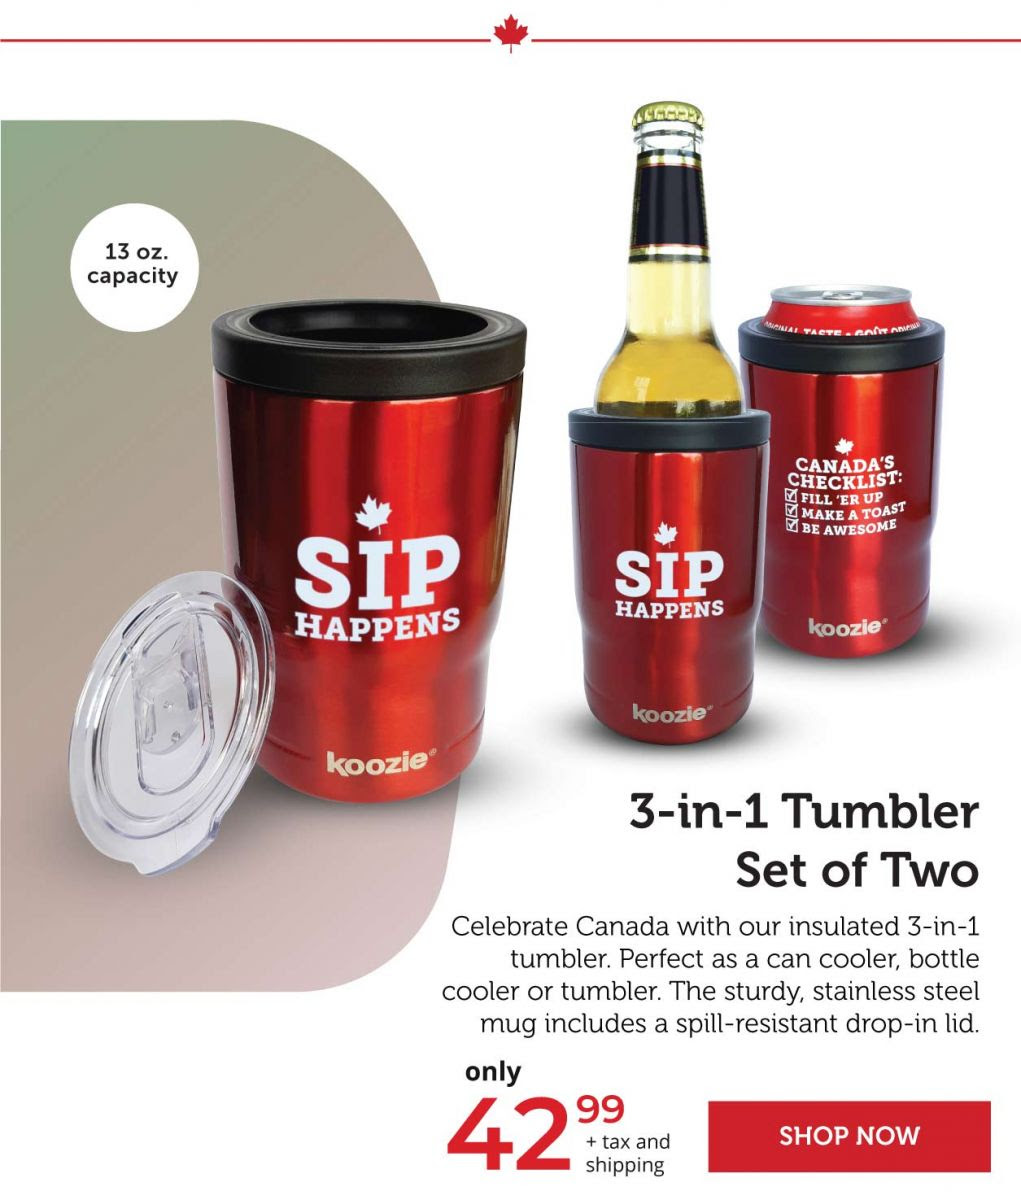 3-in-1 Tumbler Set of Two